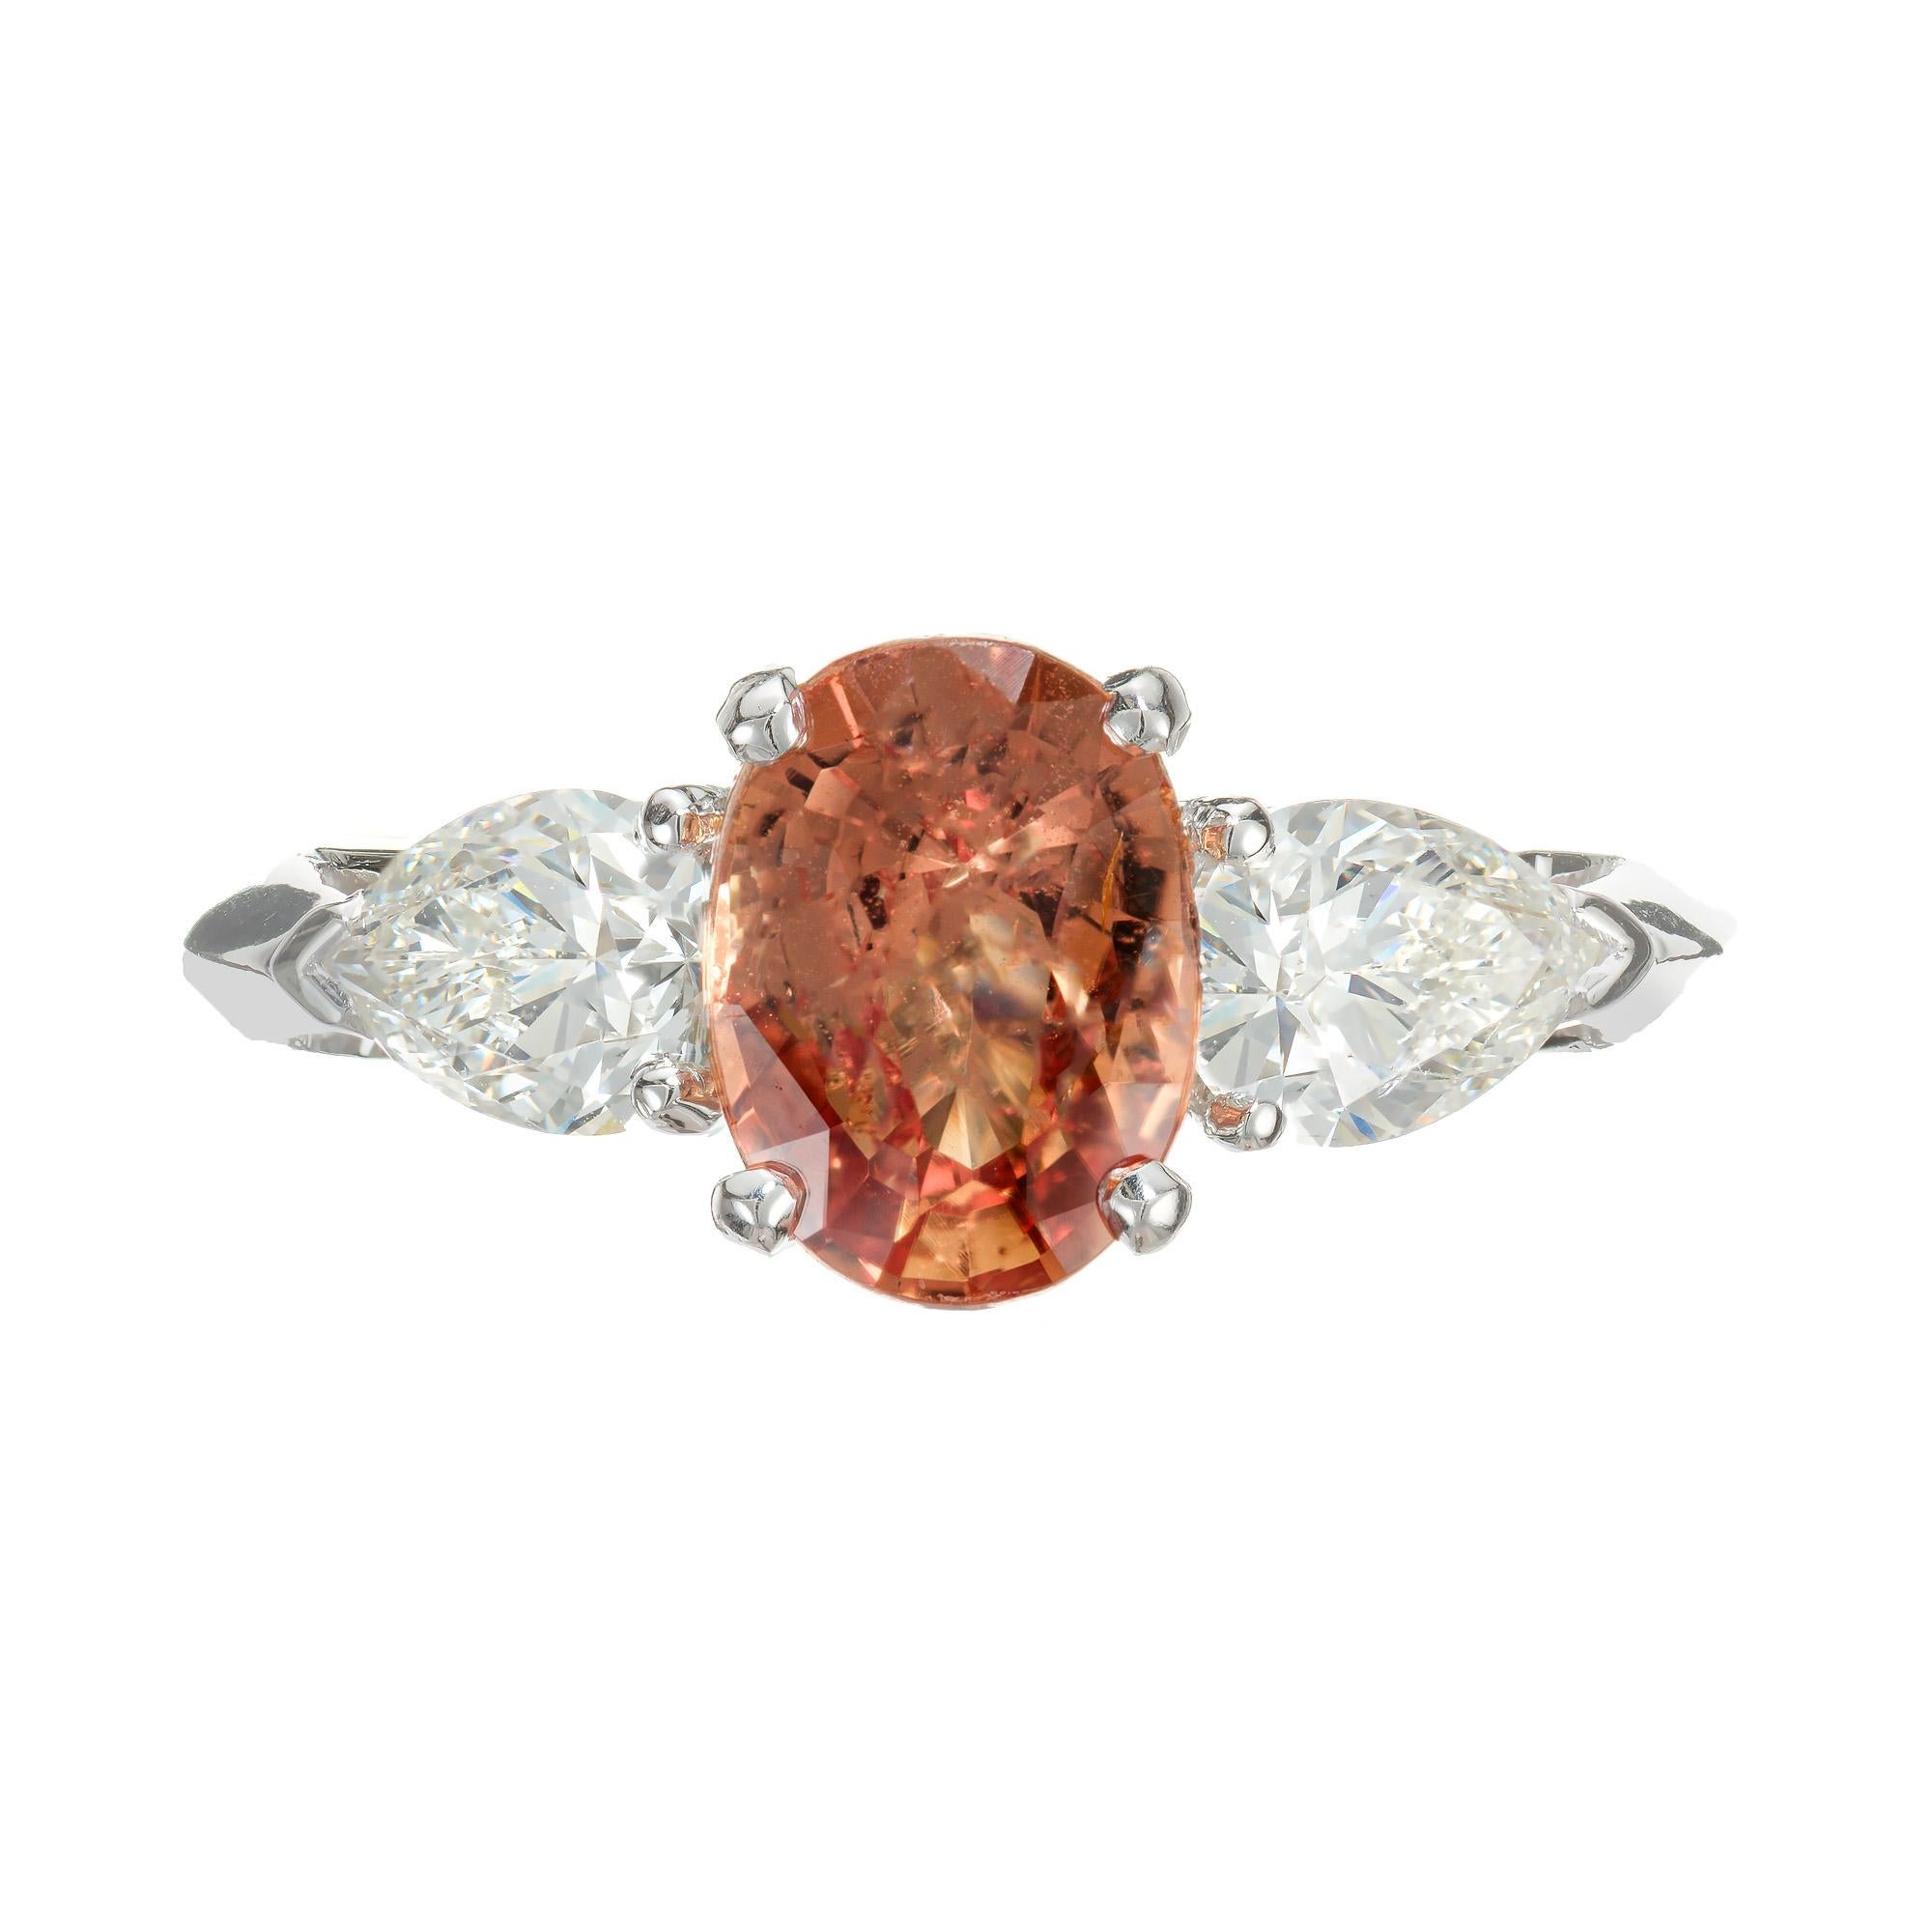 Bright natural untreated sapphire and diamond engagement ring. AGL certified, no enhancement 2.18 carat oval orange sapphire in a platinum three-stone setting with 2 GIA certified pear shaped diamonds. Strong orange color with a unique hint of pink.